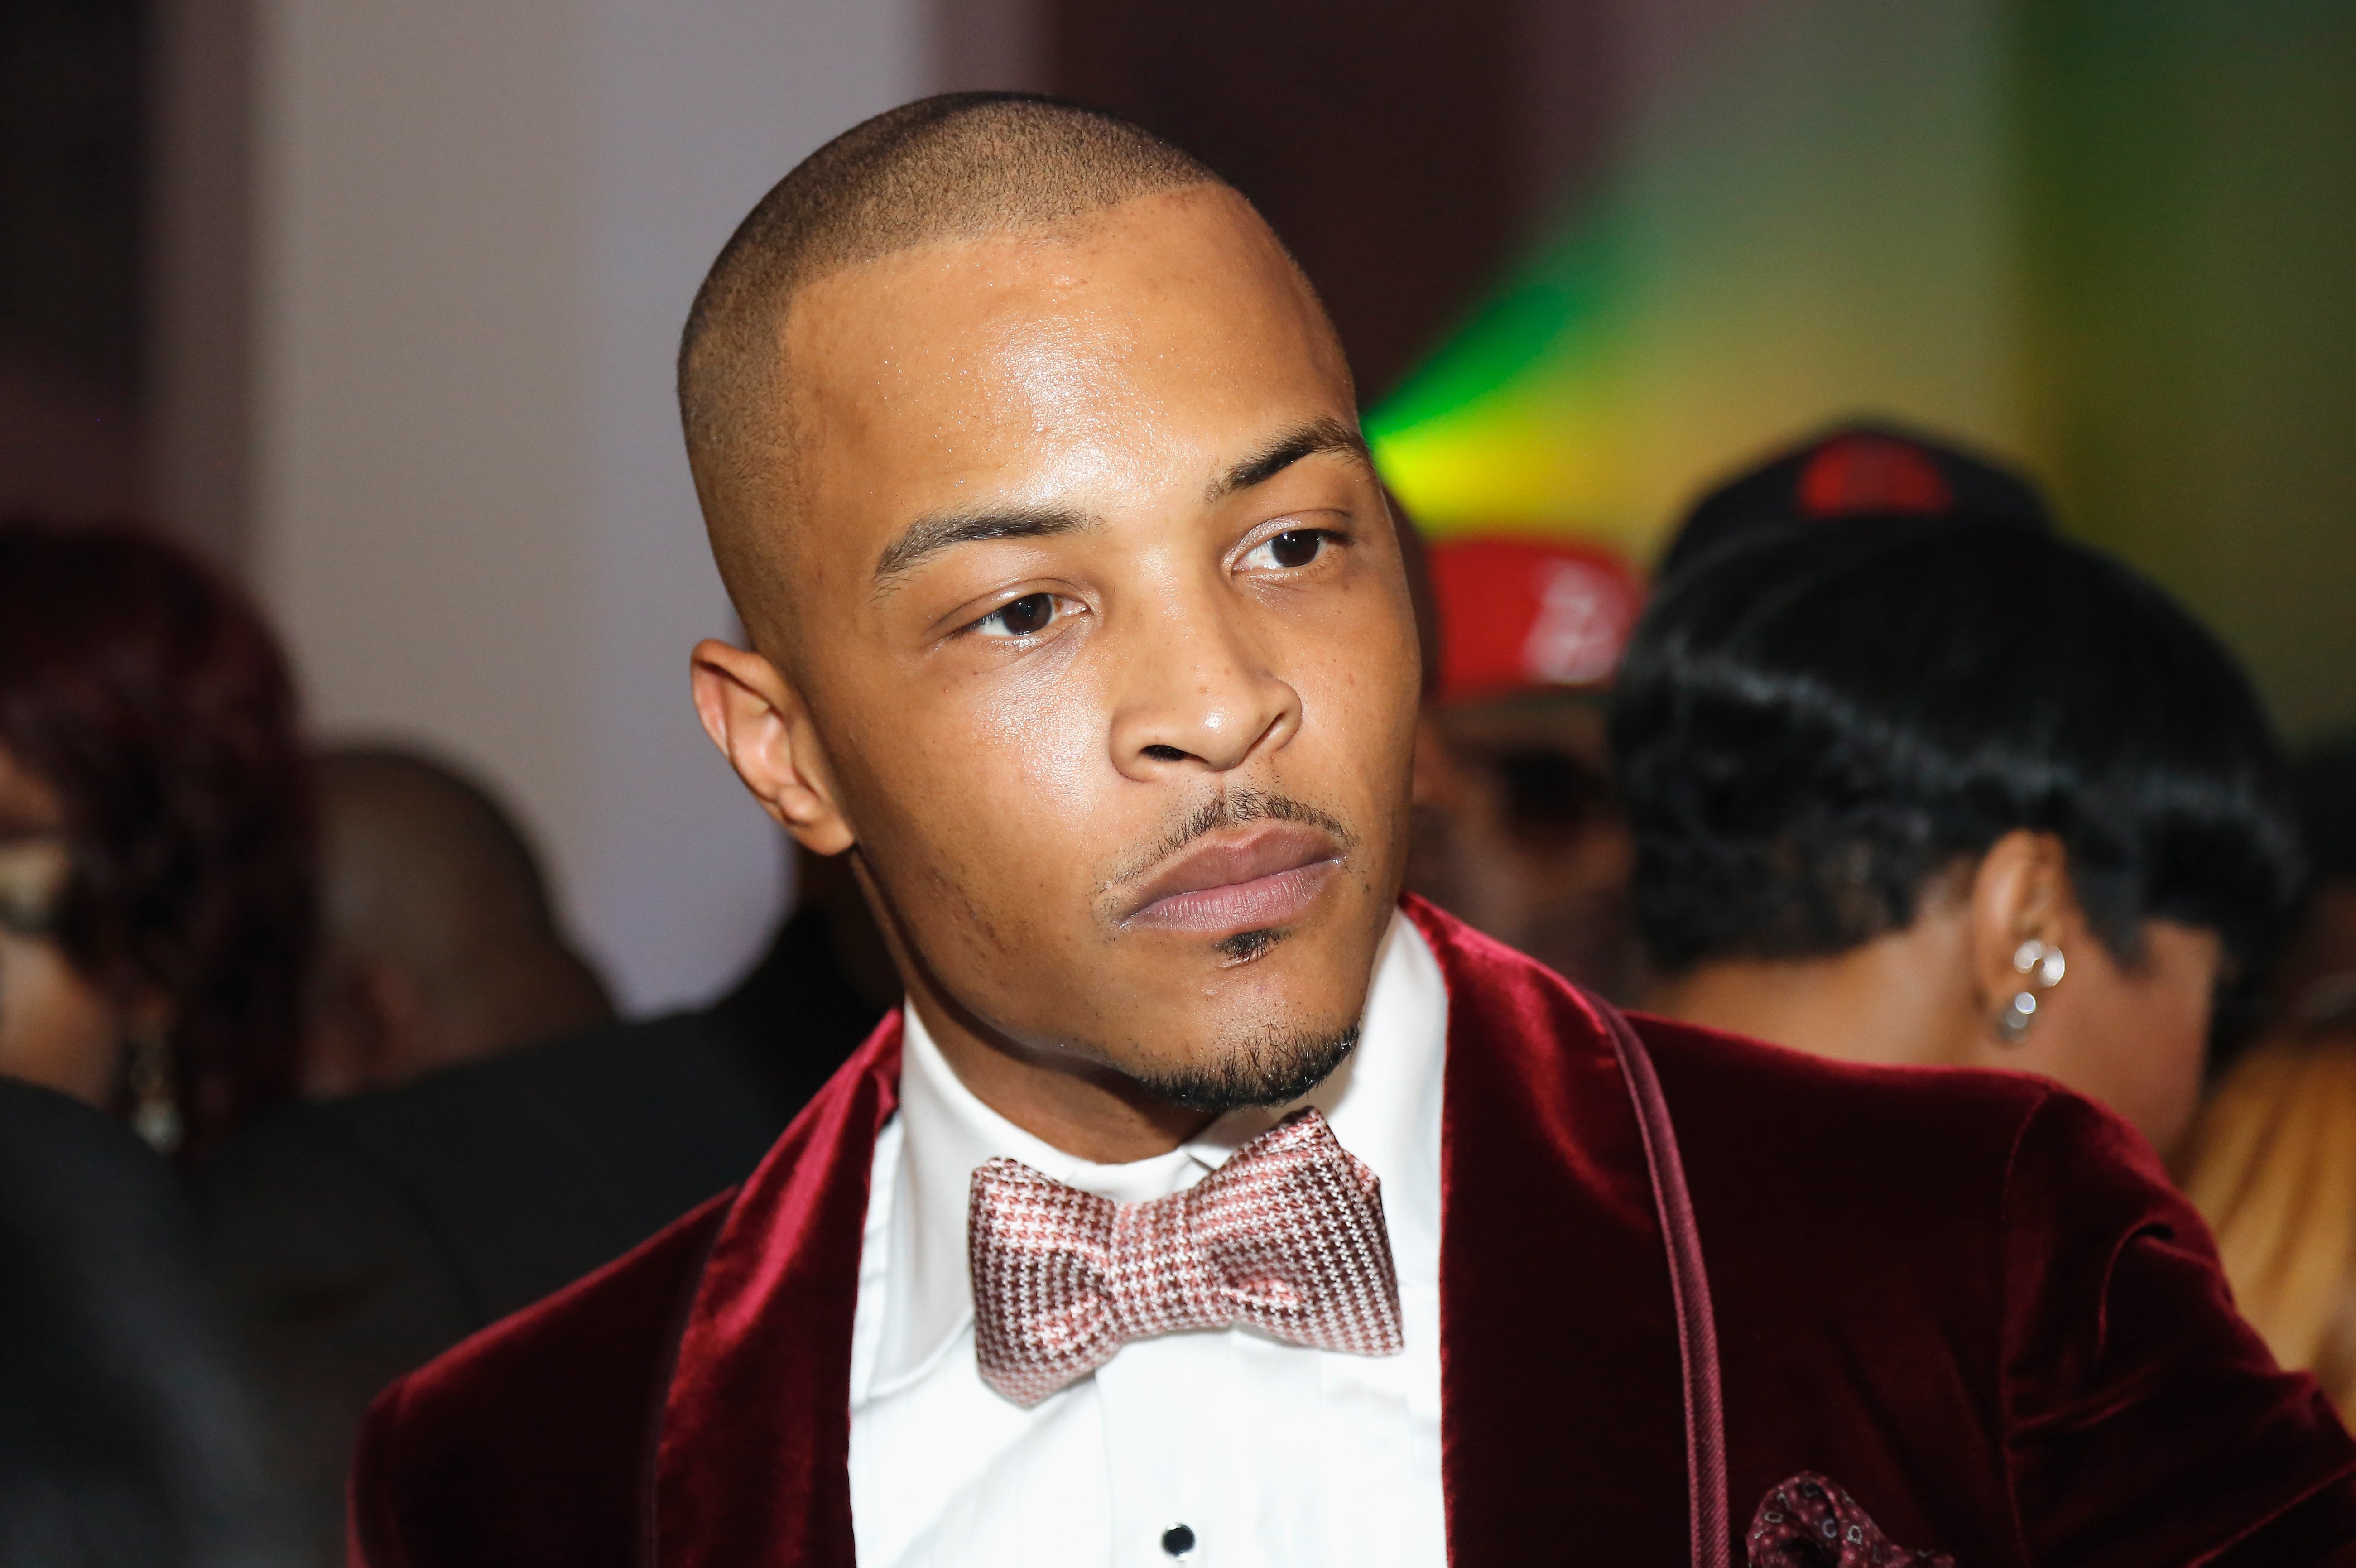 Deyjah Harris' father, T.I. during his birthday celebration hosted by Grey Goose Vodka in September 2013. | Photo: Getty Images